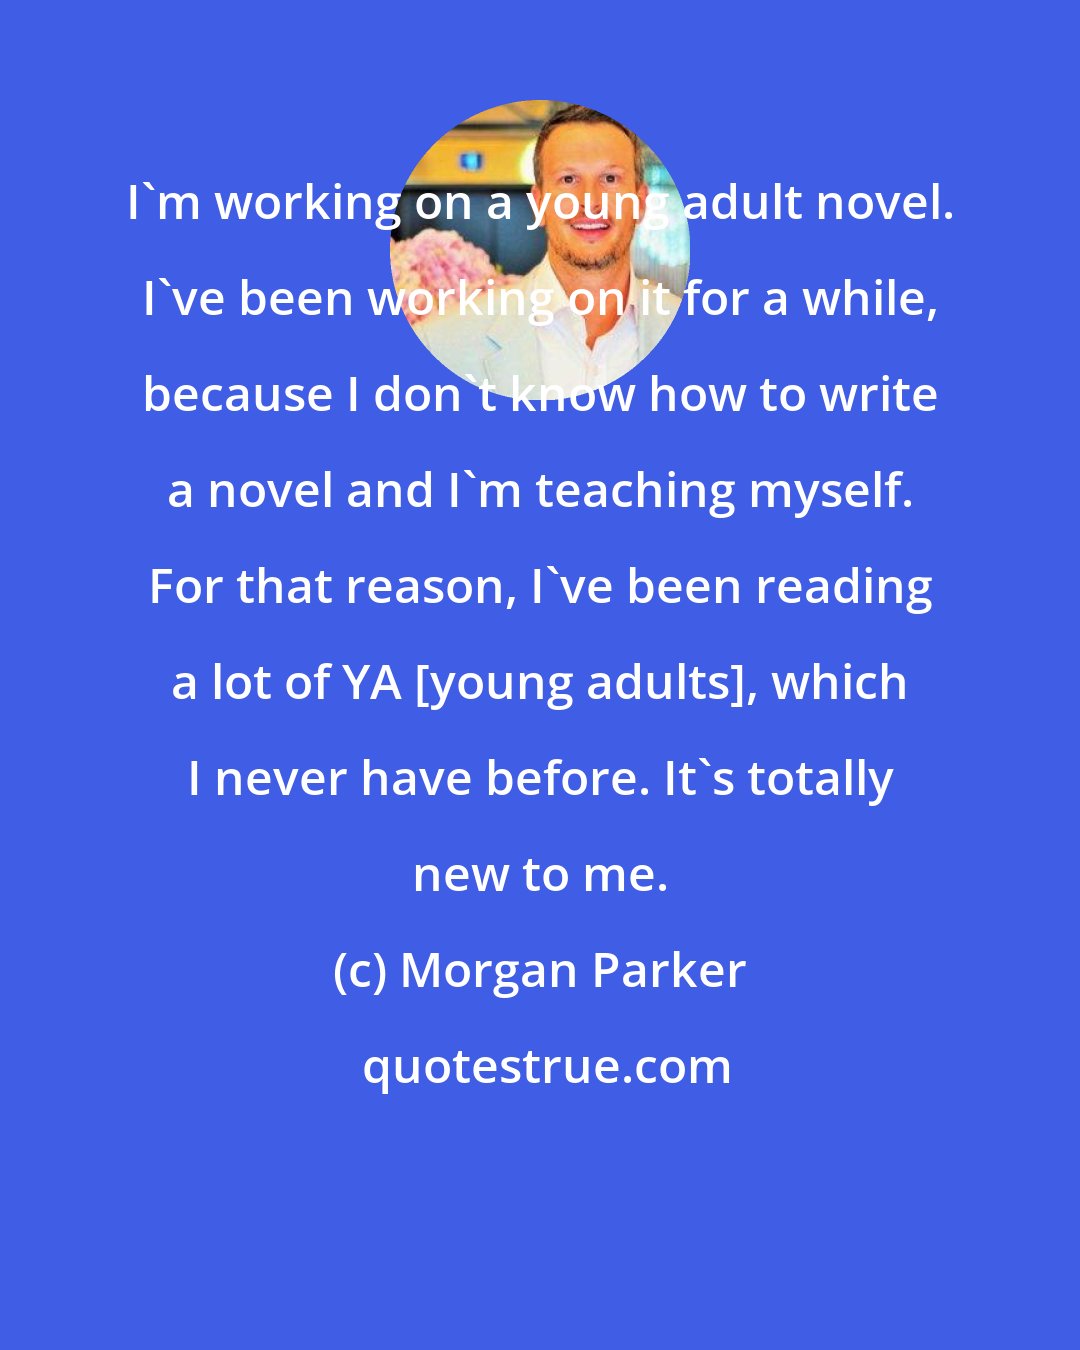 Morgan Parker: I'm working on a young adult novel. I've been working on it for a while, because I don't know how to write a novel and I'm teaching myself. For that reason, I've been reading a lot of YA [young adults], which I never have before. It's totally new to me.